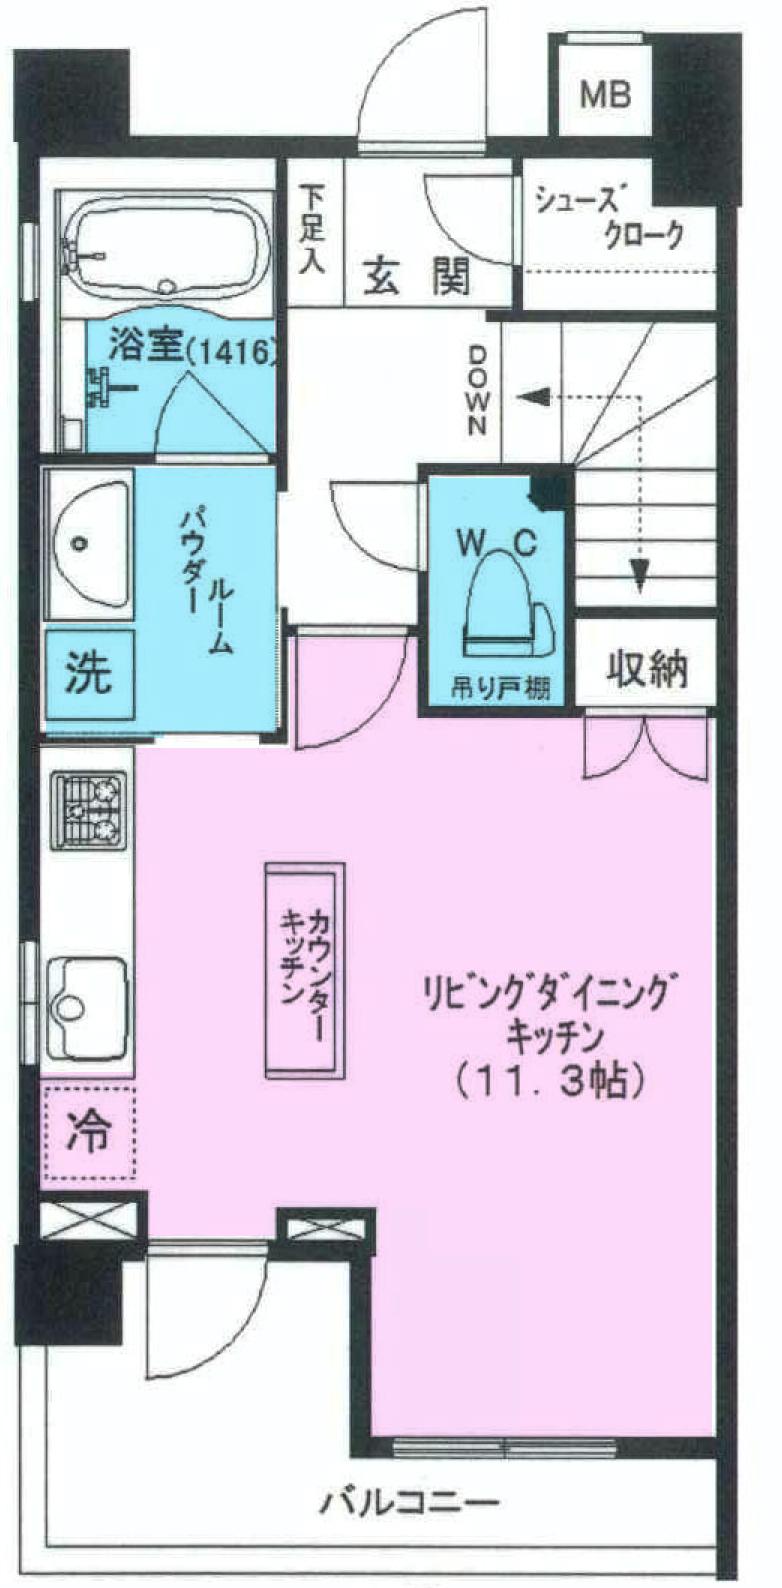 Floor plan. 3LDK, Price 37,300,000 yen, Occupied area 70.06 sq m , Concentrate on the lower floor around balcony area 10.11 sq m water. The layout of the excellent raw activity line.